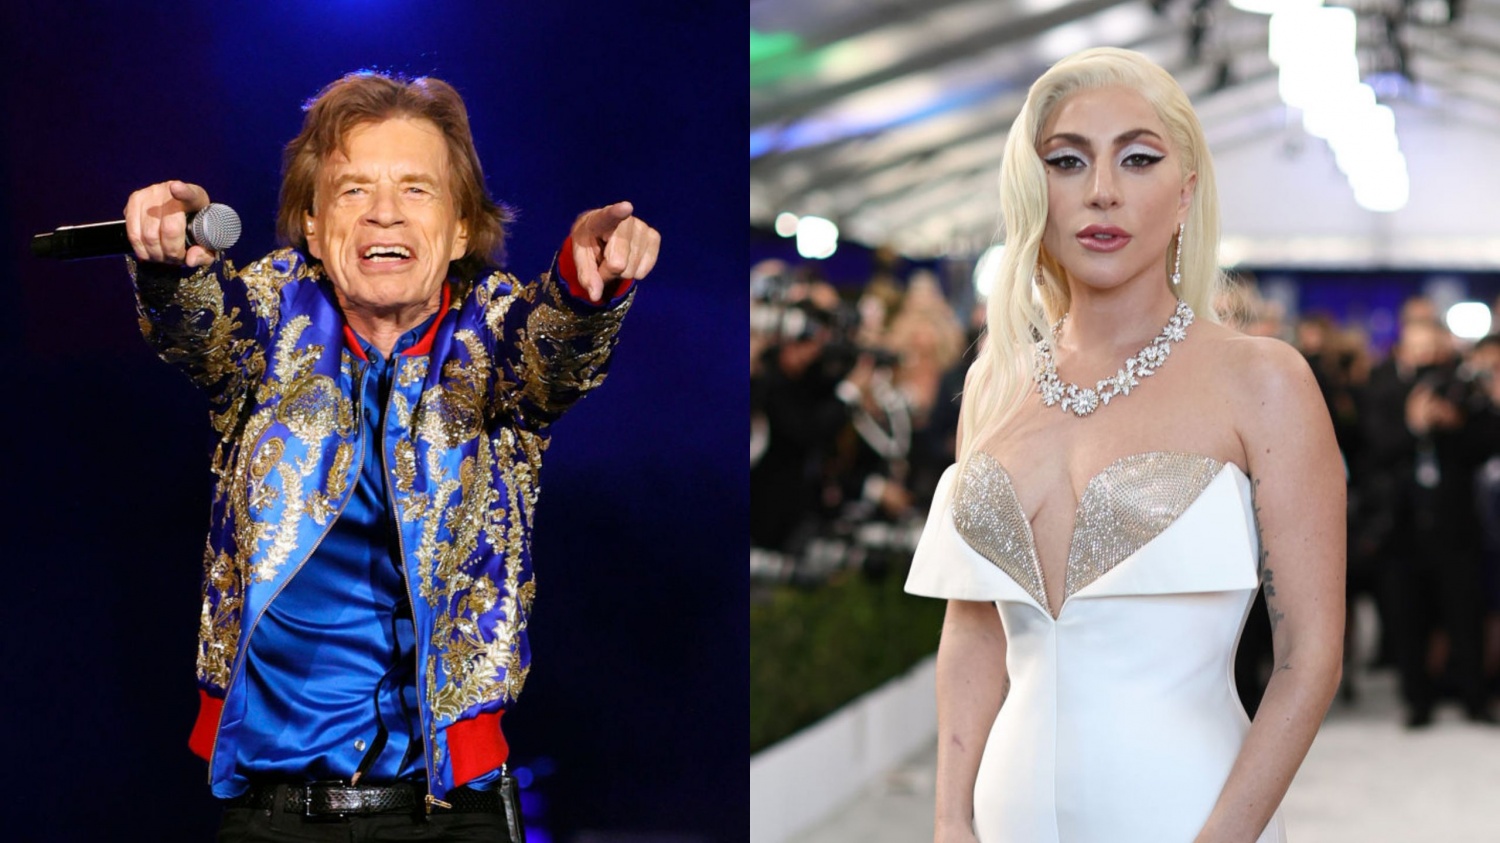 Mick Jagger of The Rolling Stones, Lady Gaga